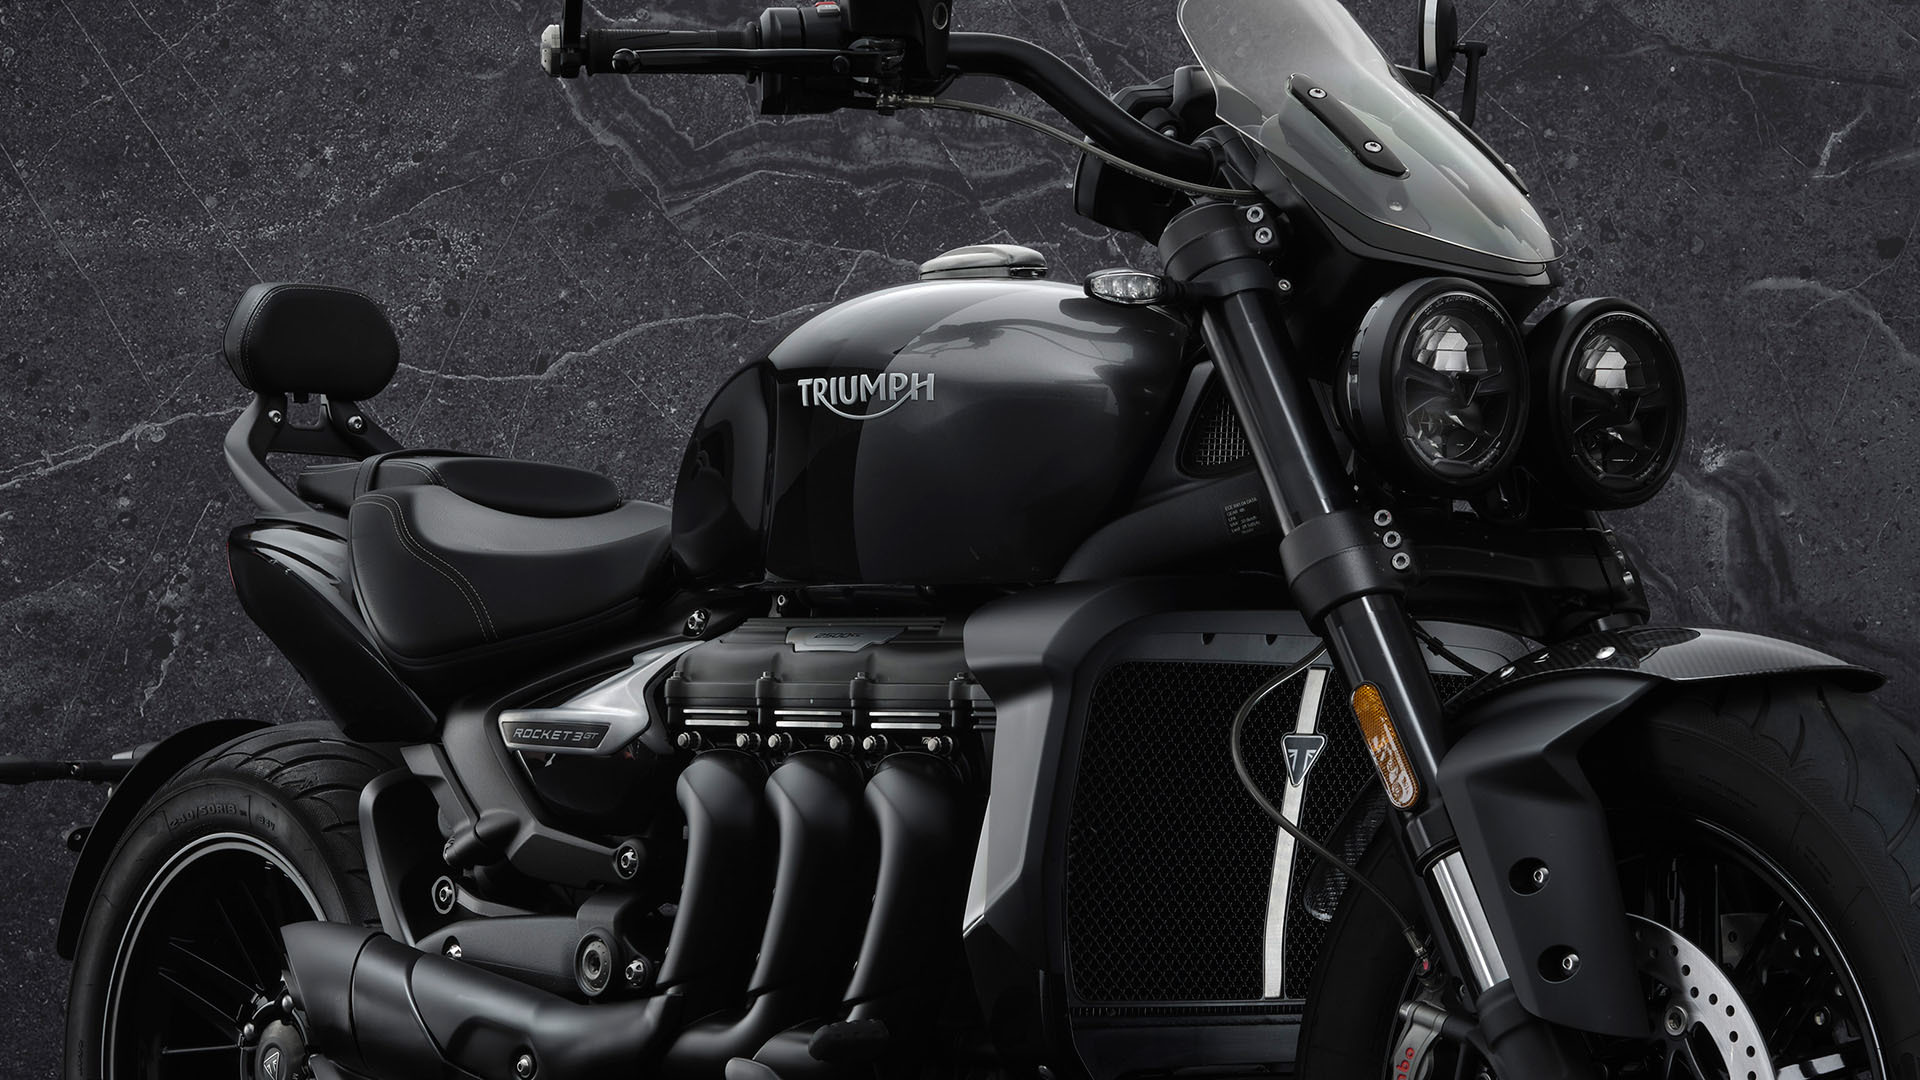 2022 Triumph Rocket 3 R Black For Sale in - Cycle Trader